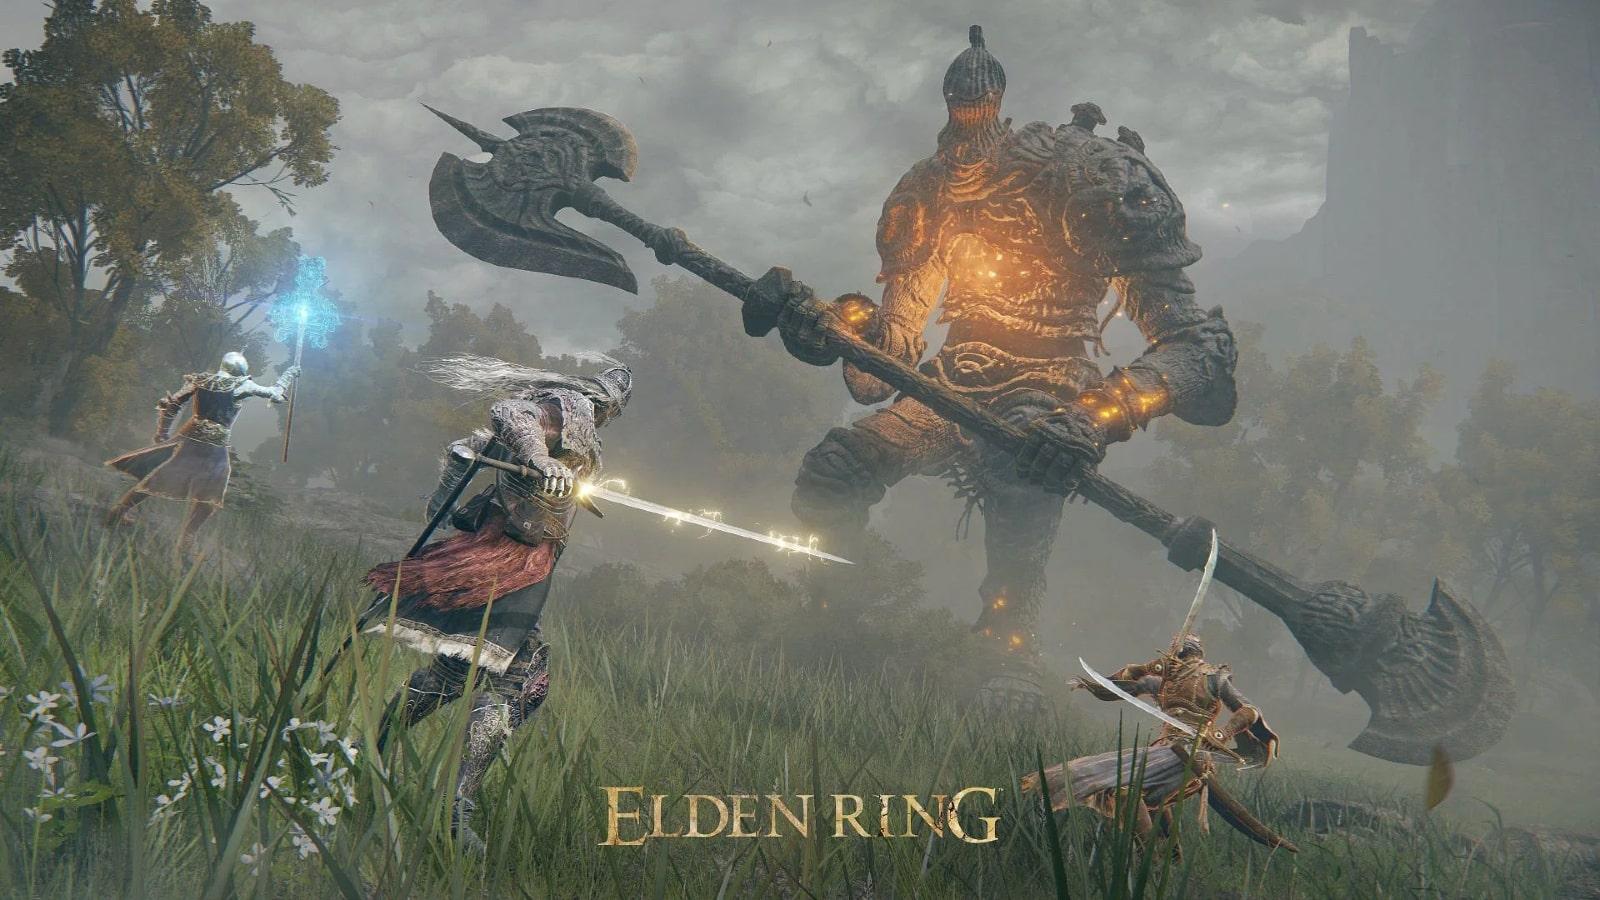 20% Agree With Elden Ring Winning the Game of the Year Title